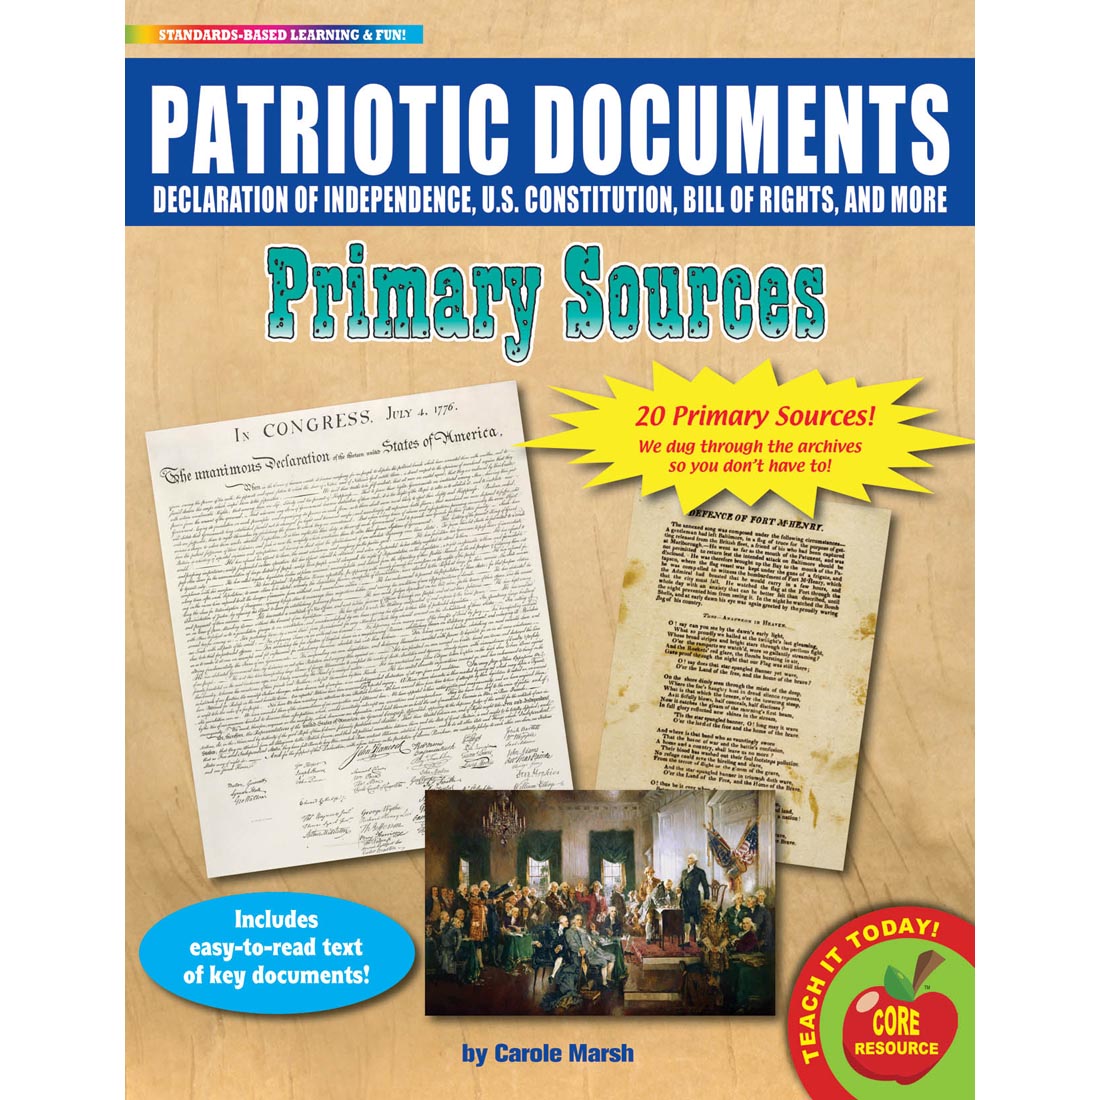 Patriotic Documents Primary Sources: Declaration of Independence, U.S. Constitution, Bill of Rights, and more